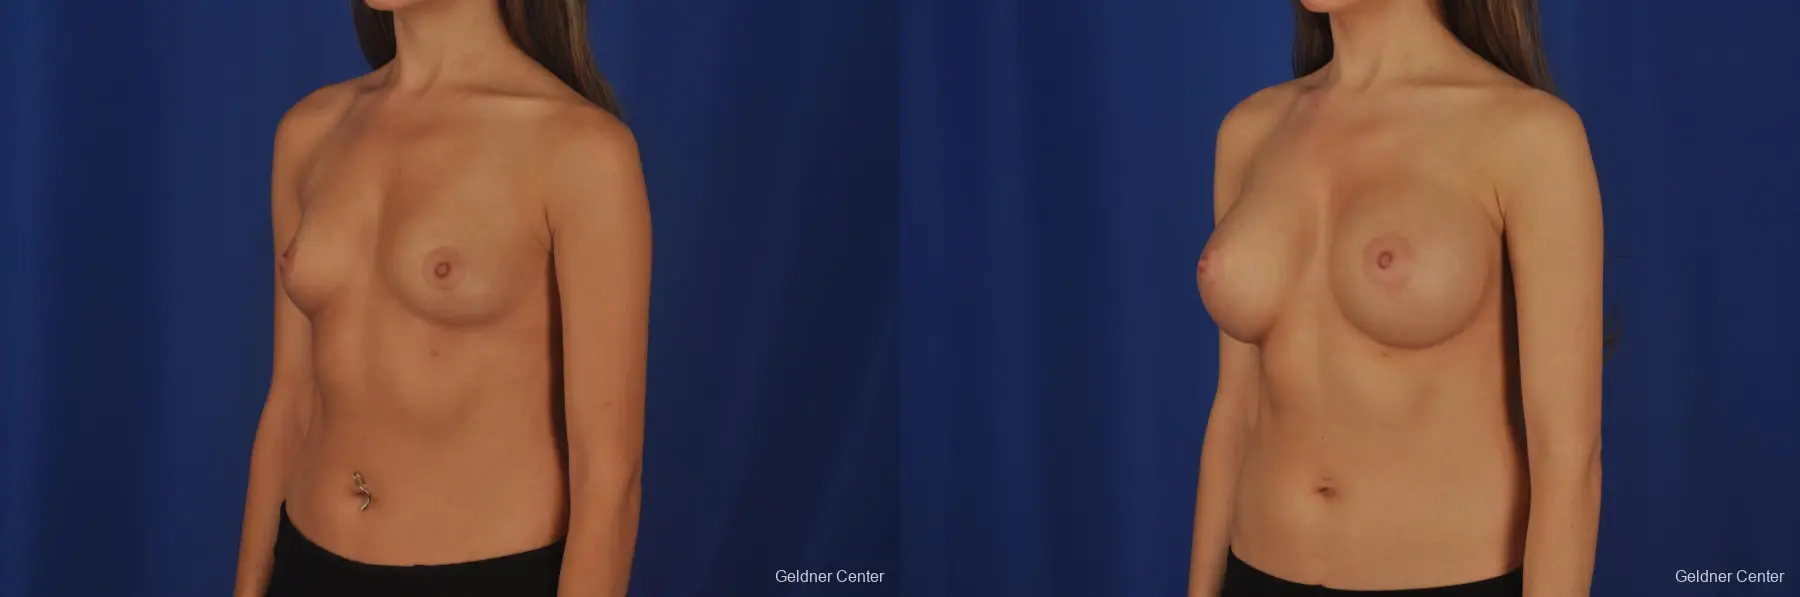 Breast Augmentation Hinsdale, Chicago 2373 - Before and After 4